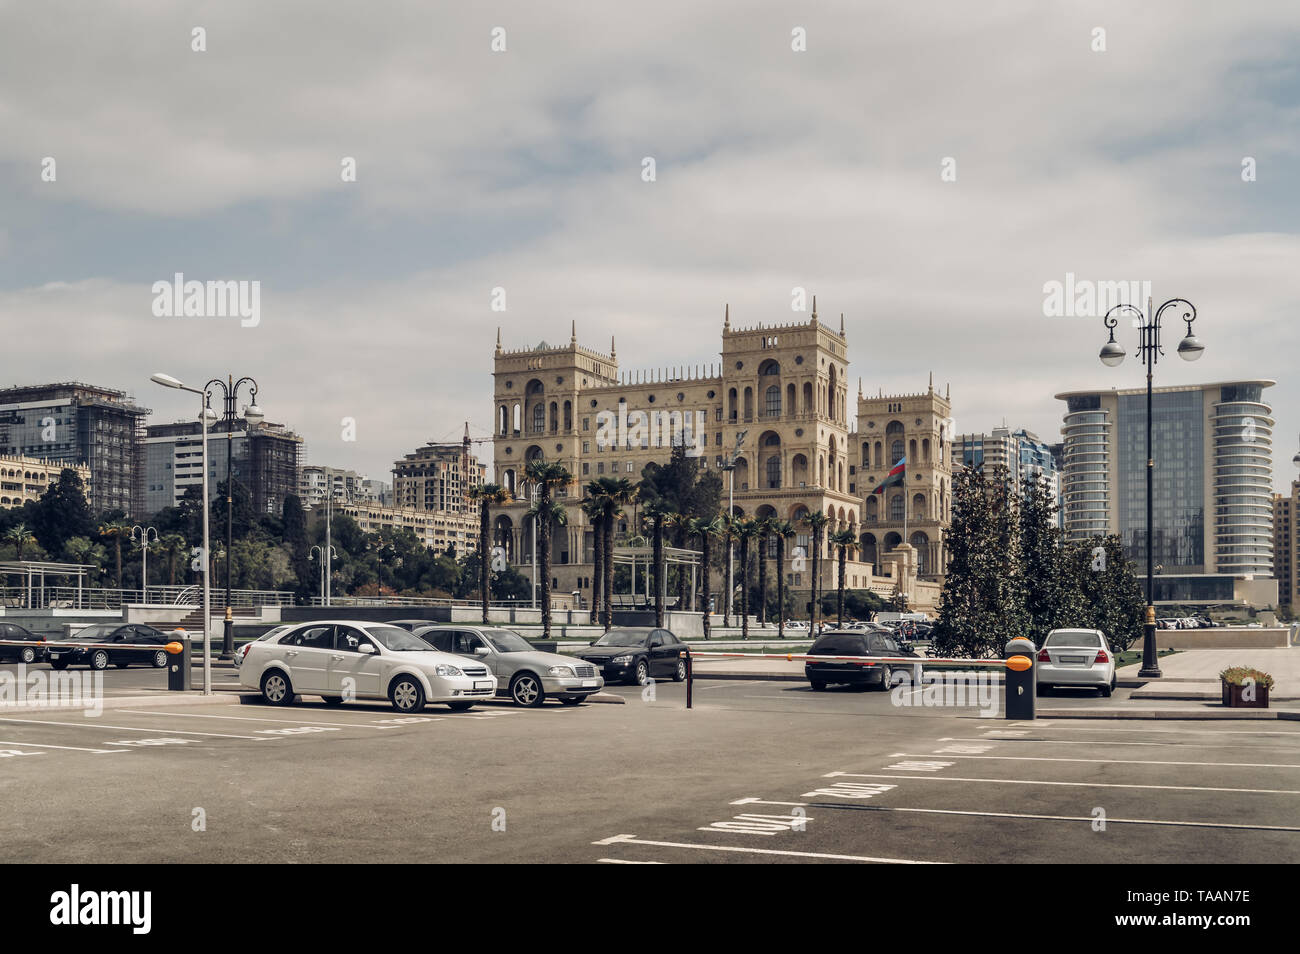 Parking lot in Baku with House of Government and cityscape on background Stock Photo